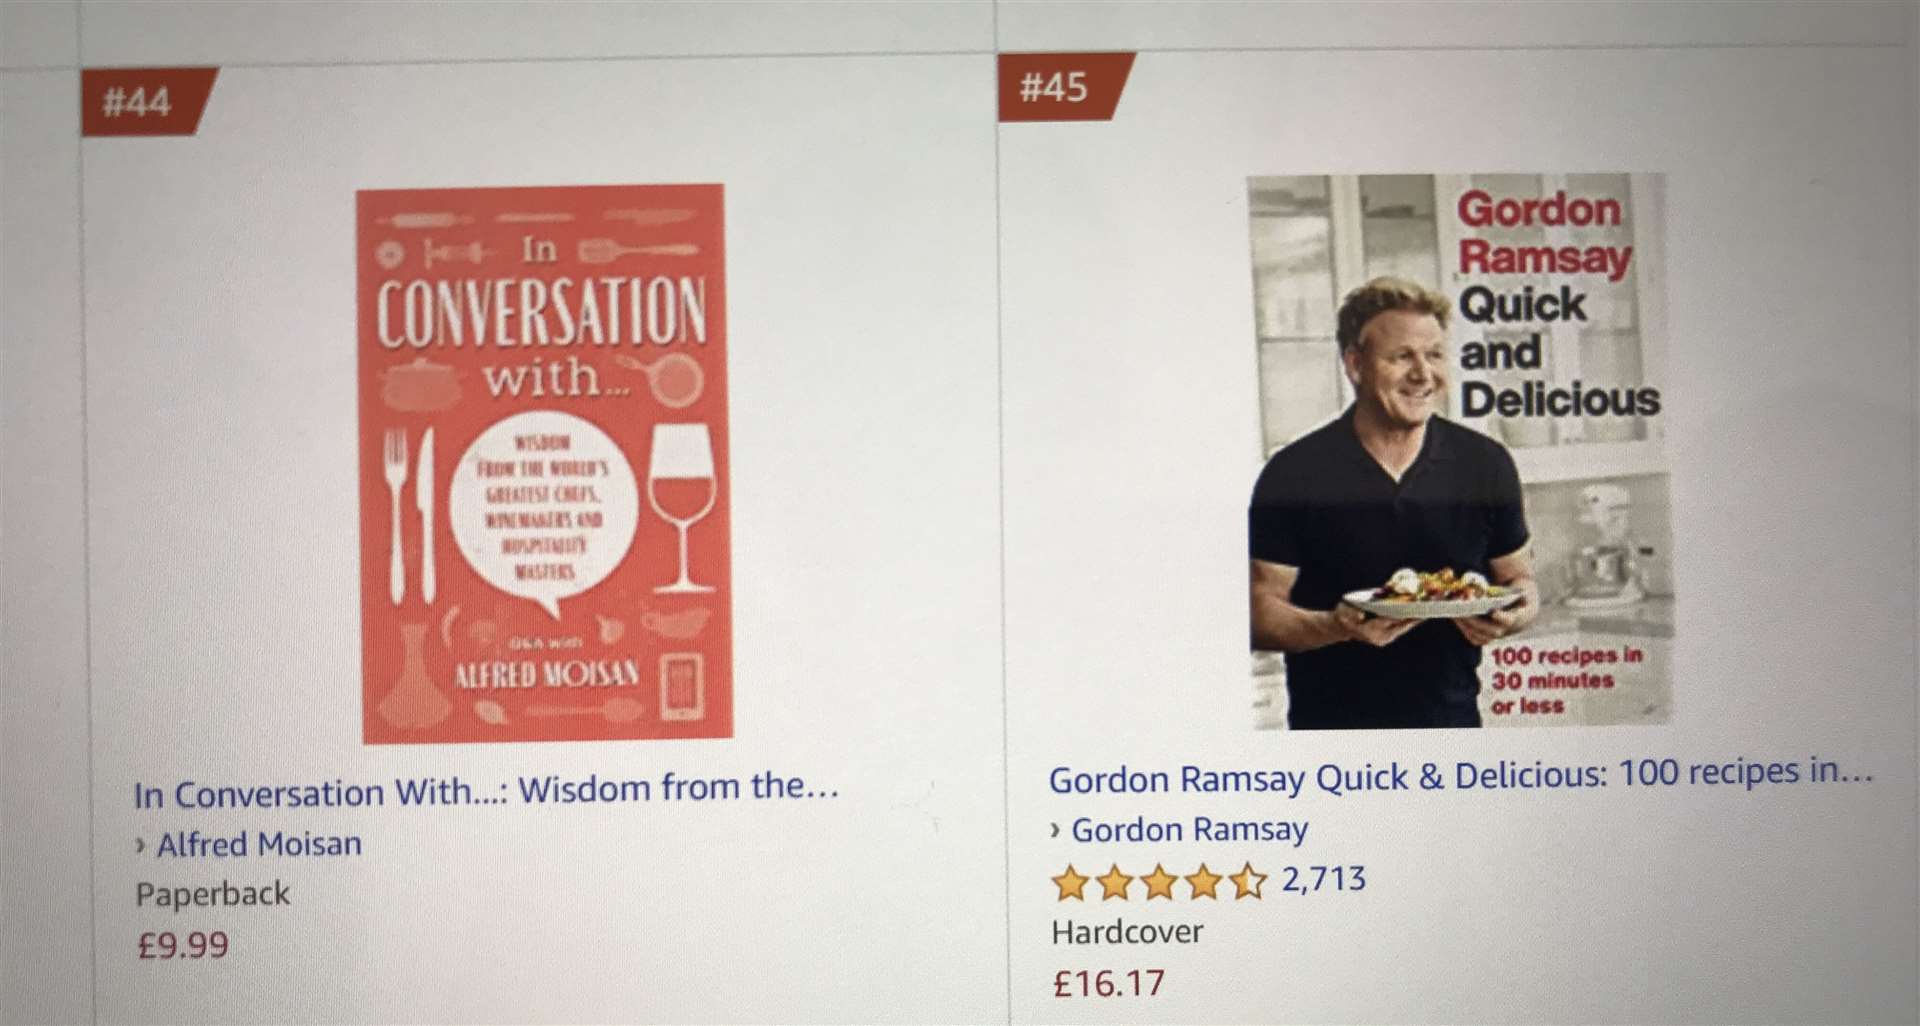 Alfred Moisan's book ahead of Gordon Ramsey in Amazon's top 50 cookery books list